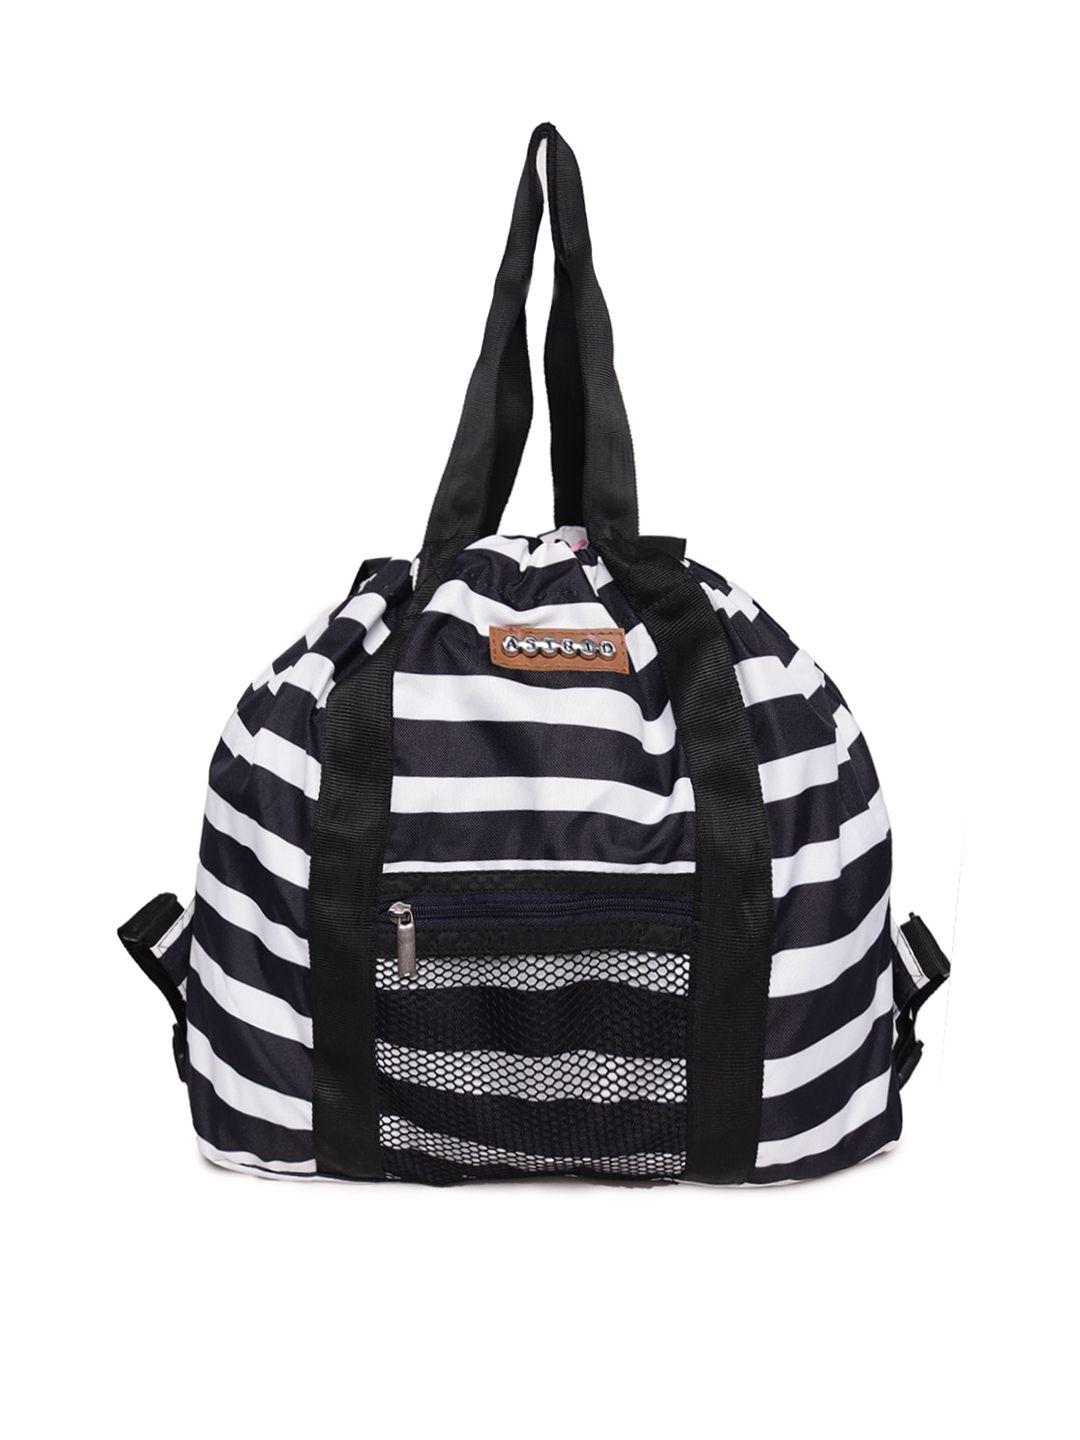 astrid striped shopper tote bag with backpack straps